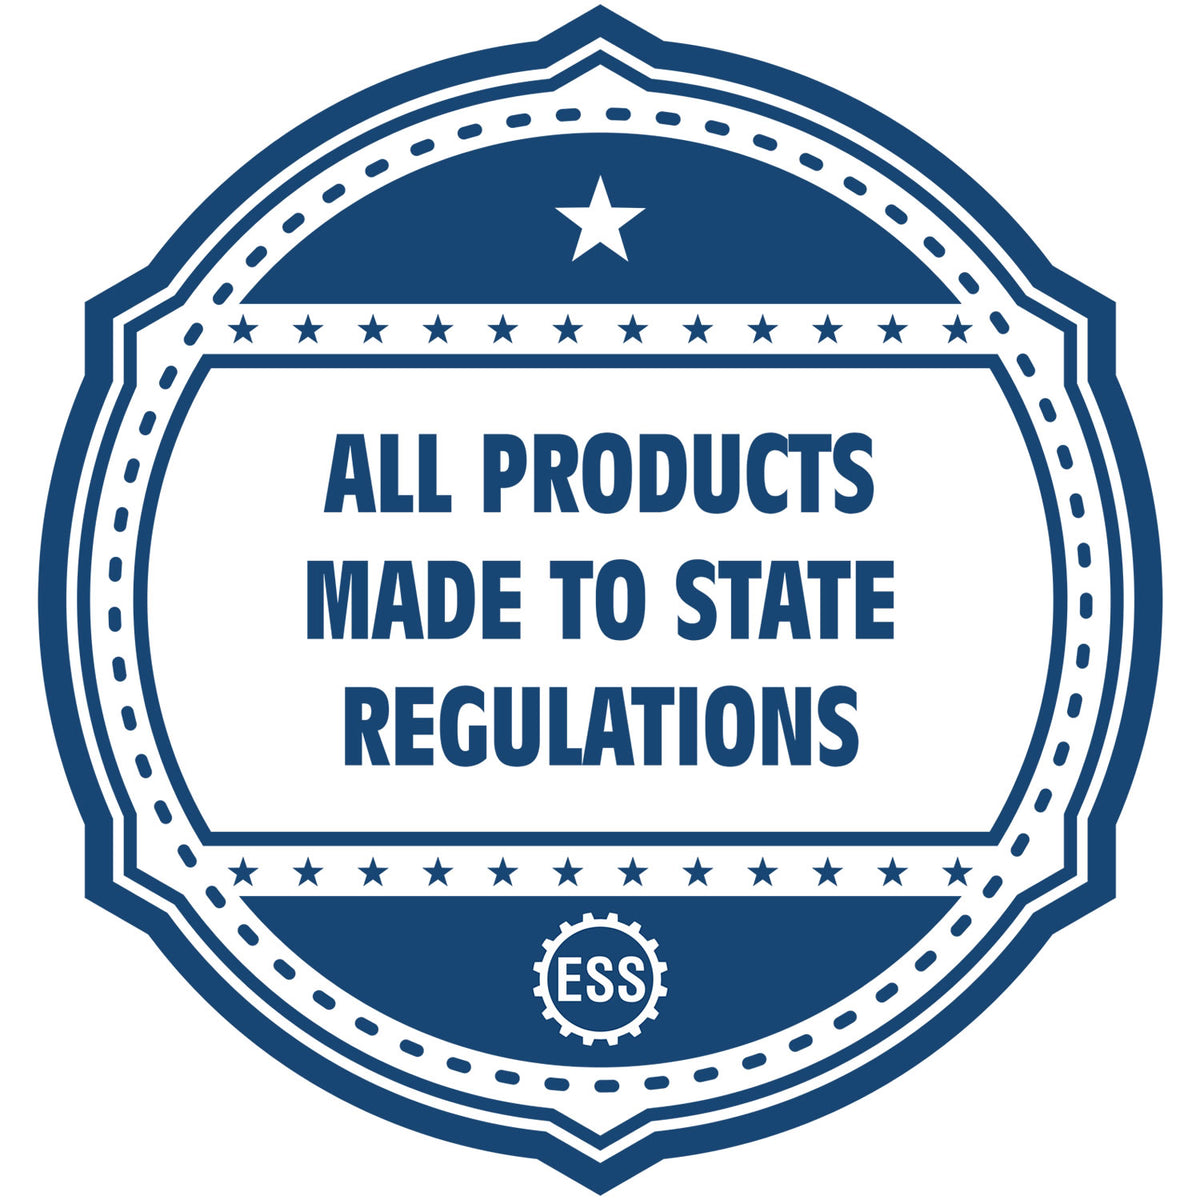 An icon or badge element for the Heavy Duty Cast Iron Alaska Engineer Seal Embosser showing that this product is made in compliance with state regulations.